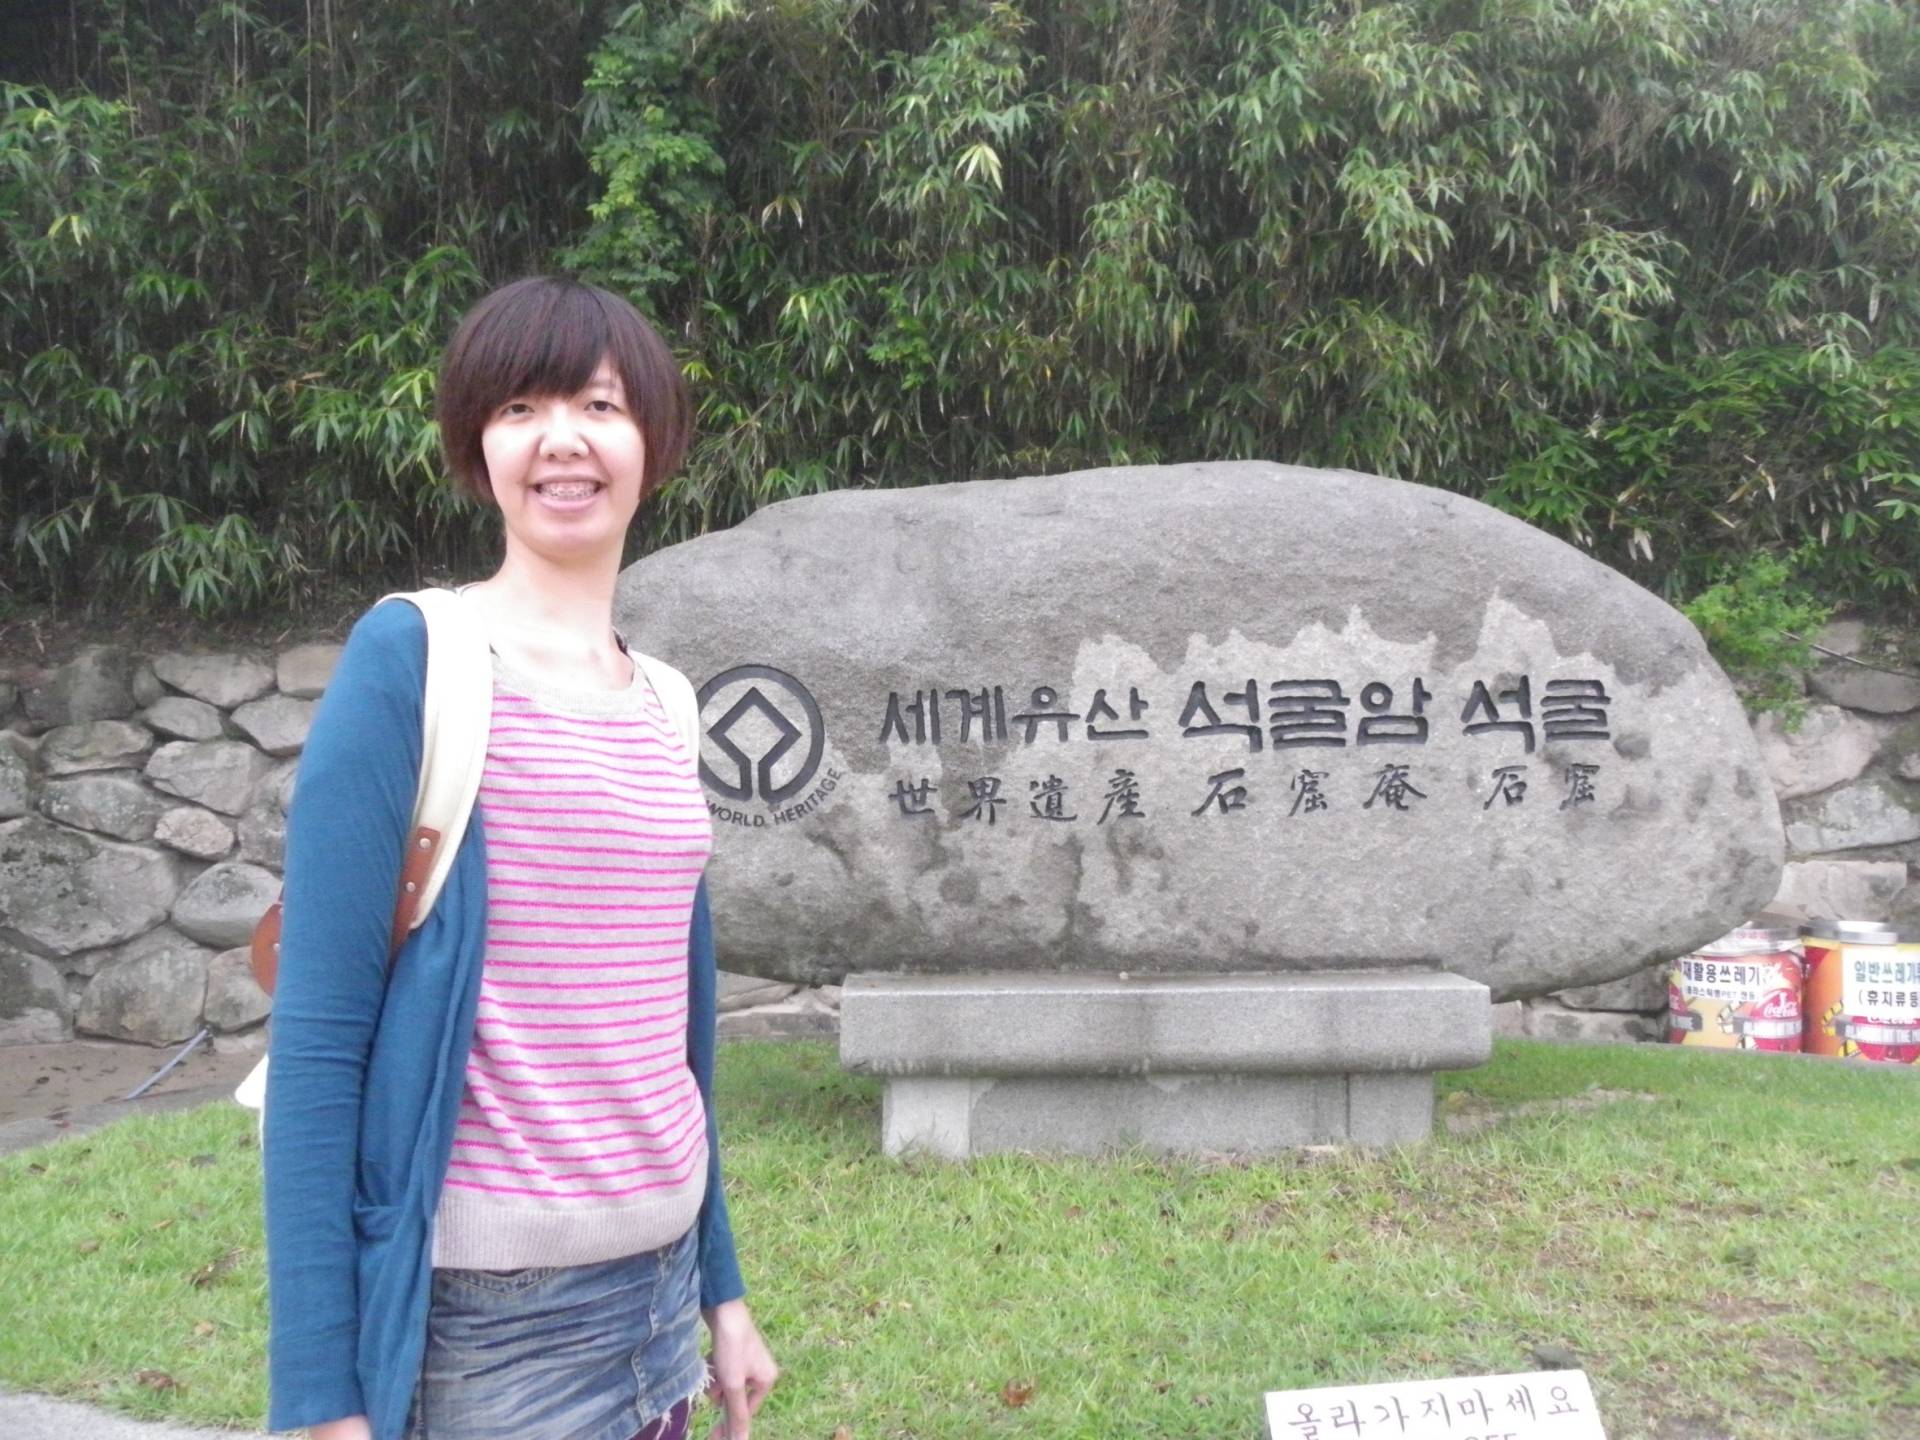 Image of Tzu-Han Chou in front of a Large Stone Statue.